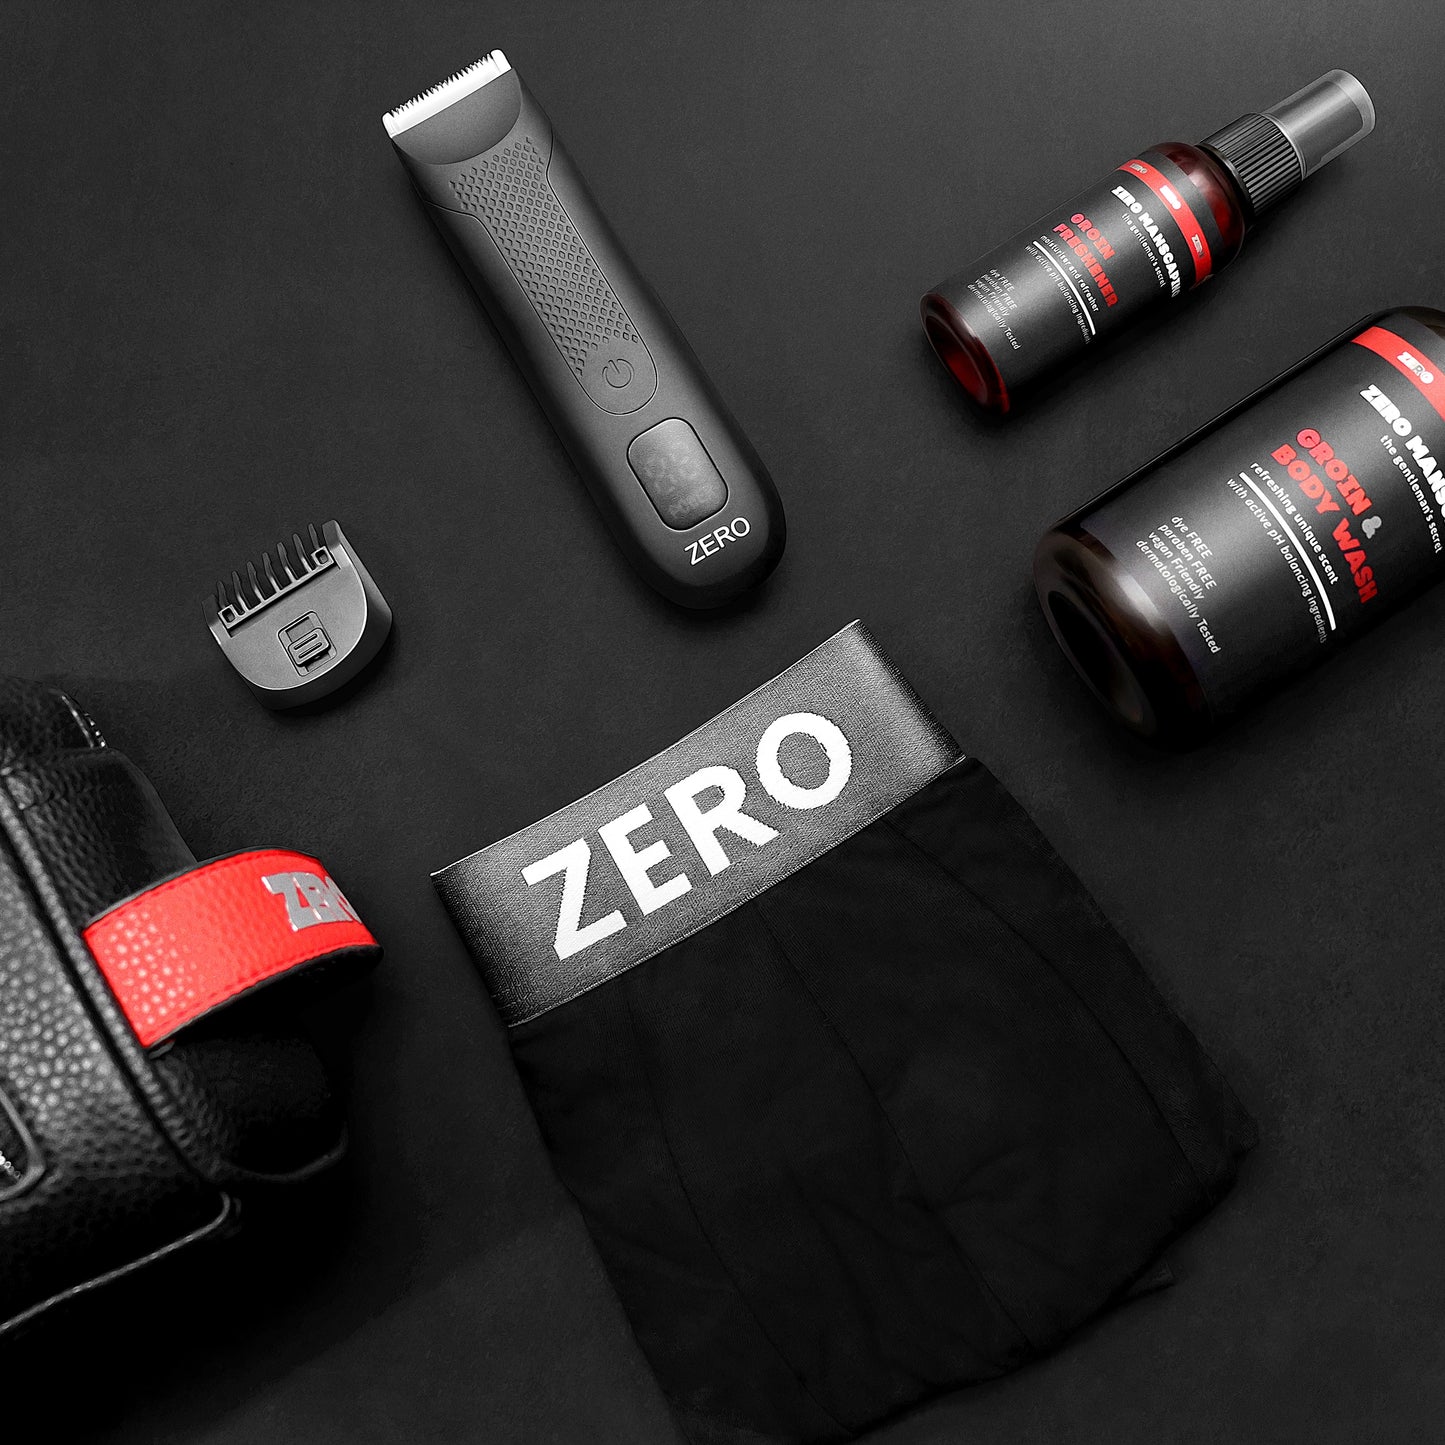 Zero Groomer by Zero Manscaping - Revolutionary manscaping tool for precise grooming.